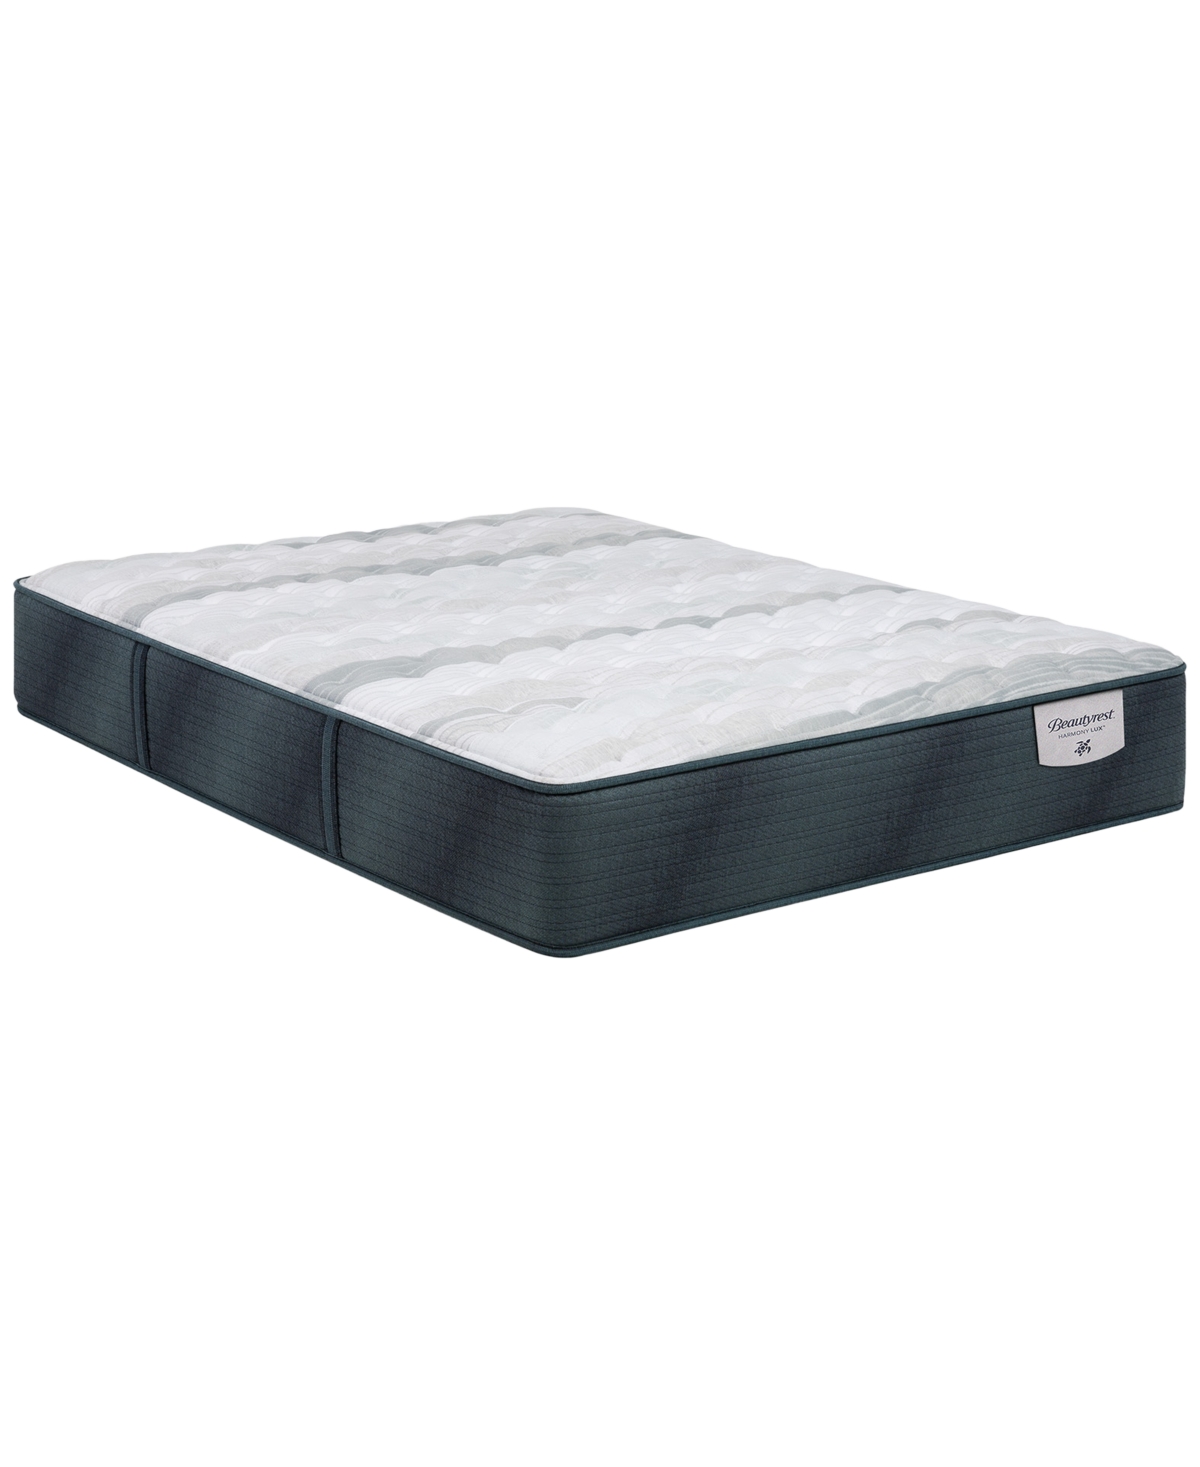 Beautyrest Harmony Lux Anchor Island 12.5" Firm Mattress Set In No Color